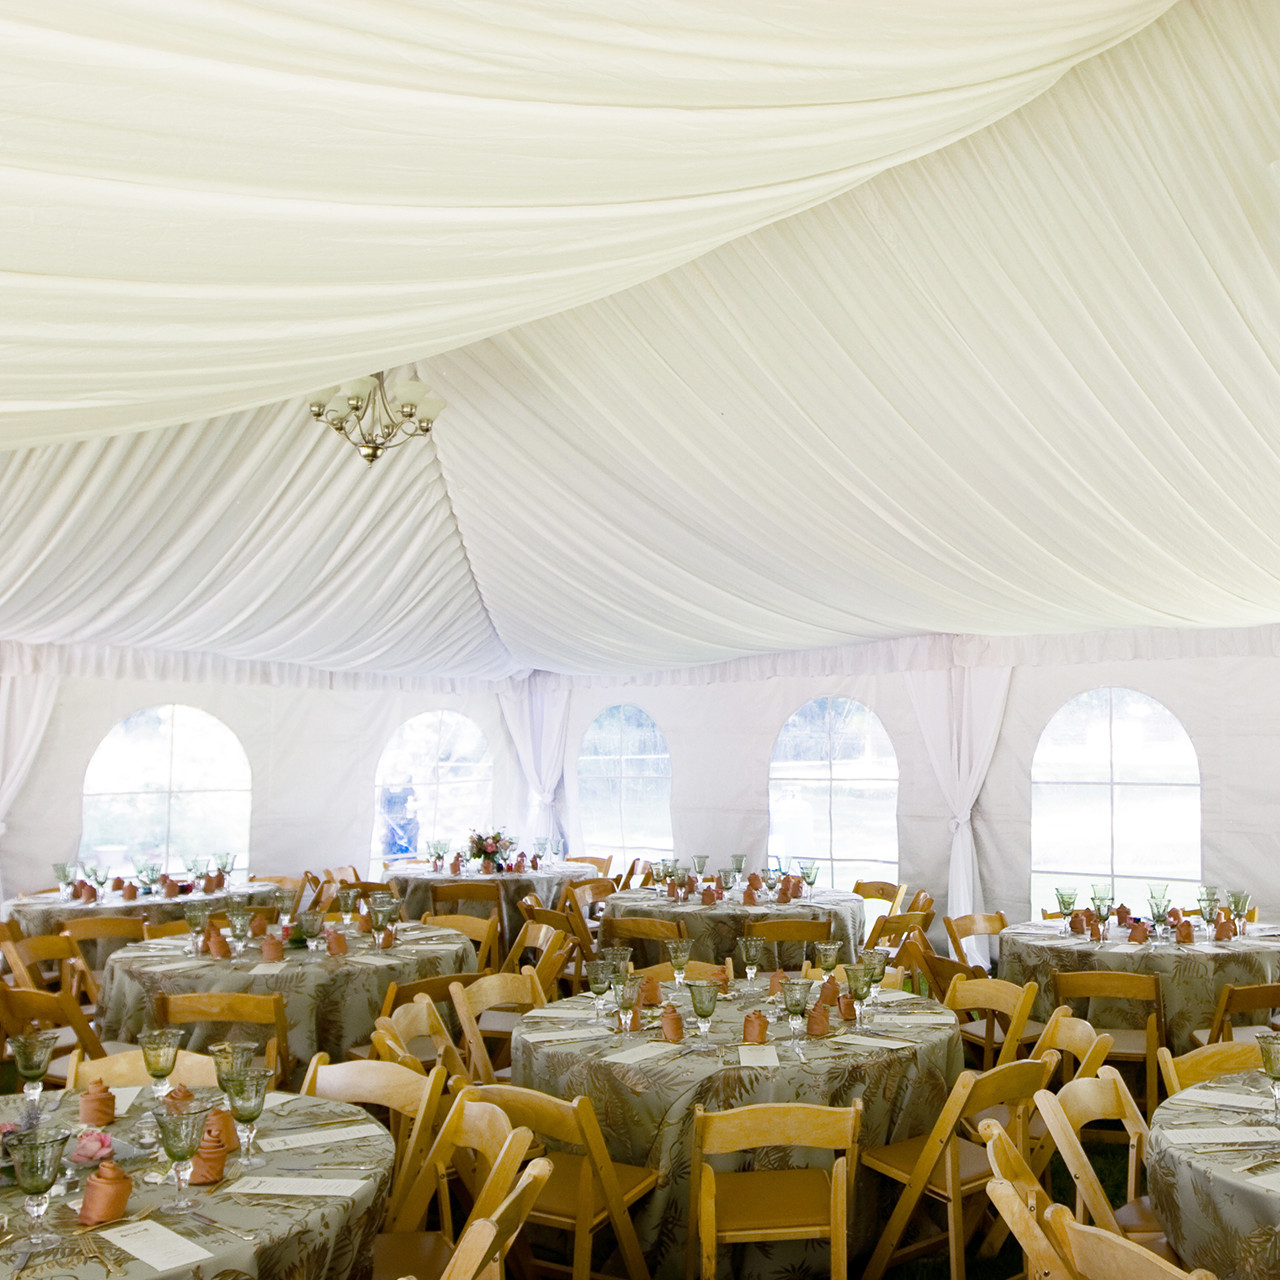 White polyester HI-PRO frame tent liner giving a high class look.